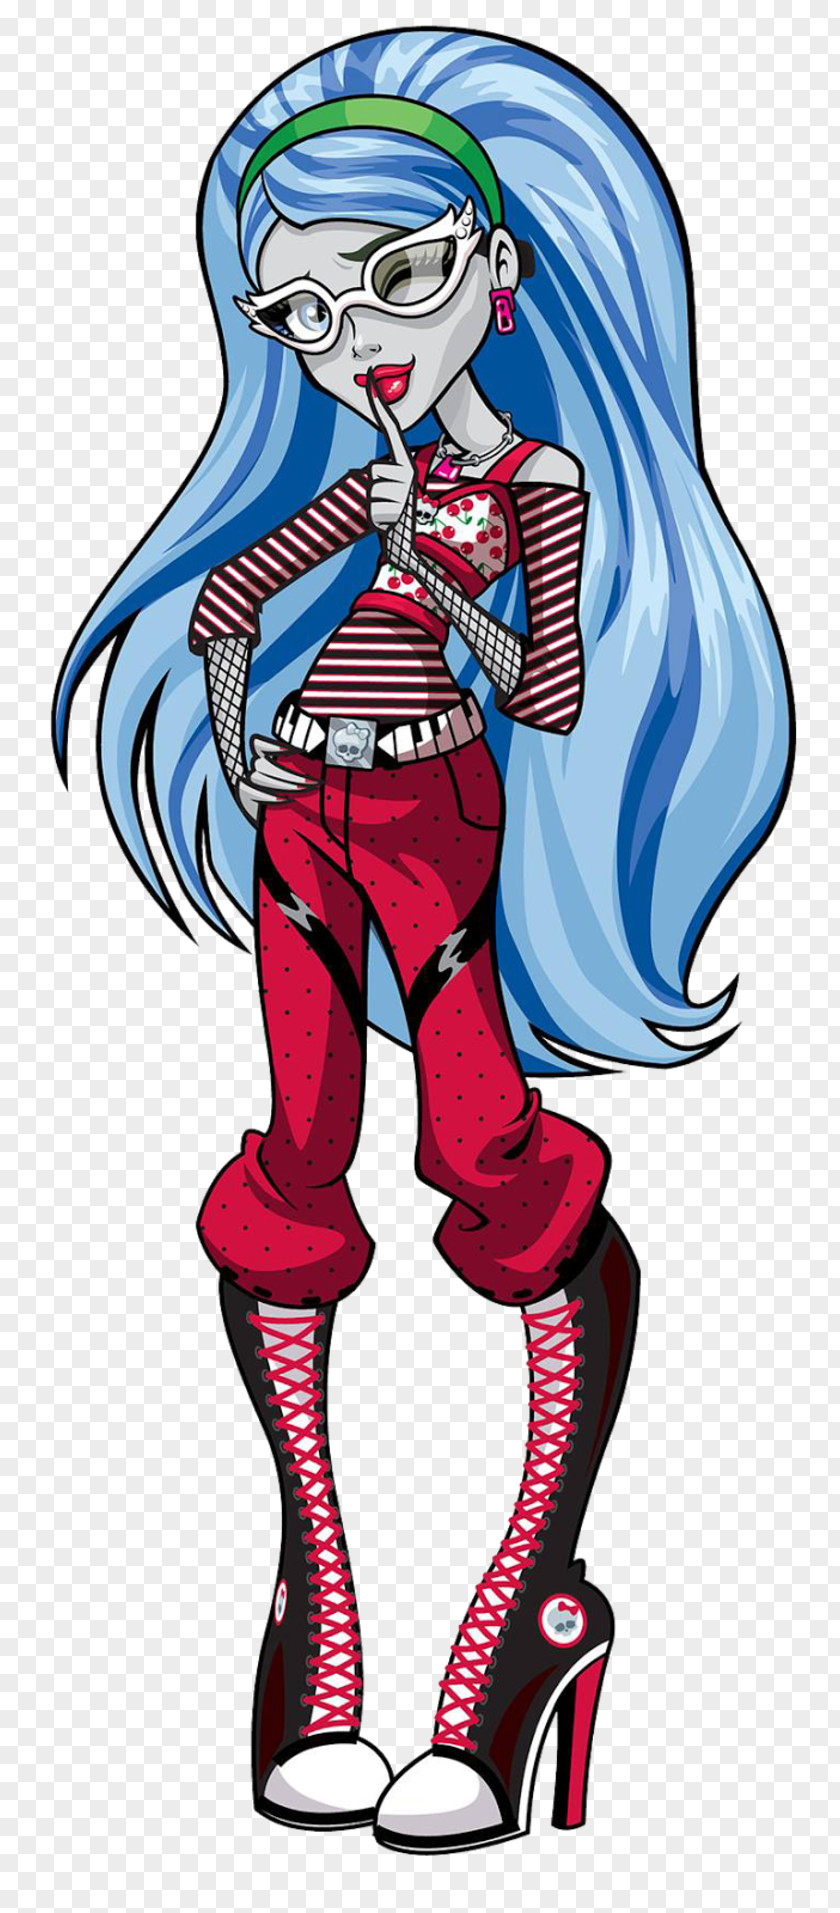 Ghoul Monster High Ghoulia Yelps Lagoona Blue Frankie Stein PNG